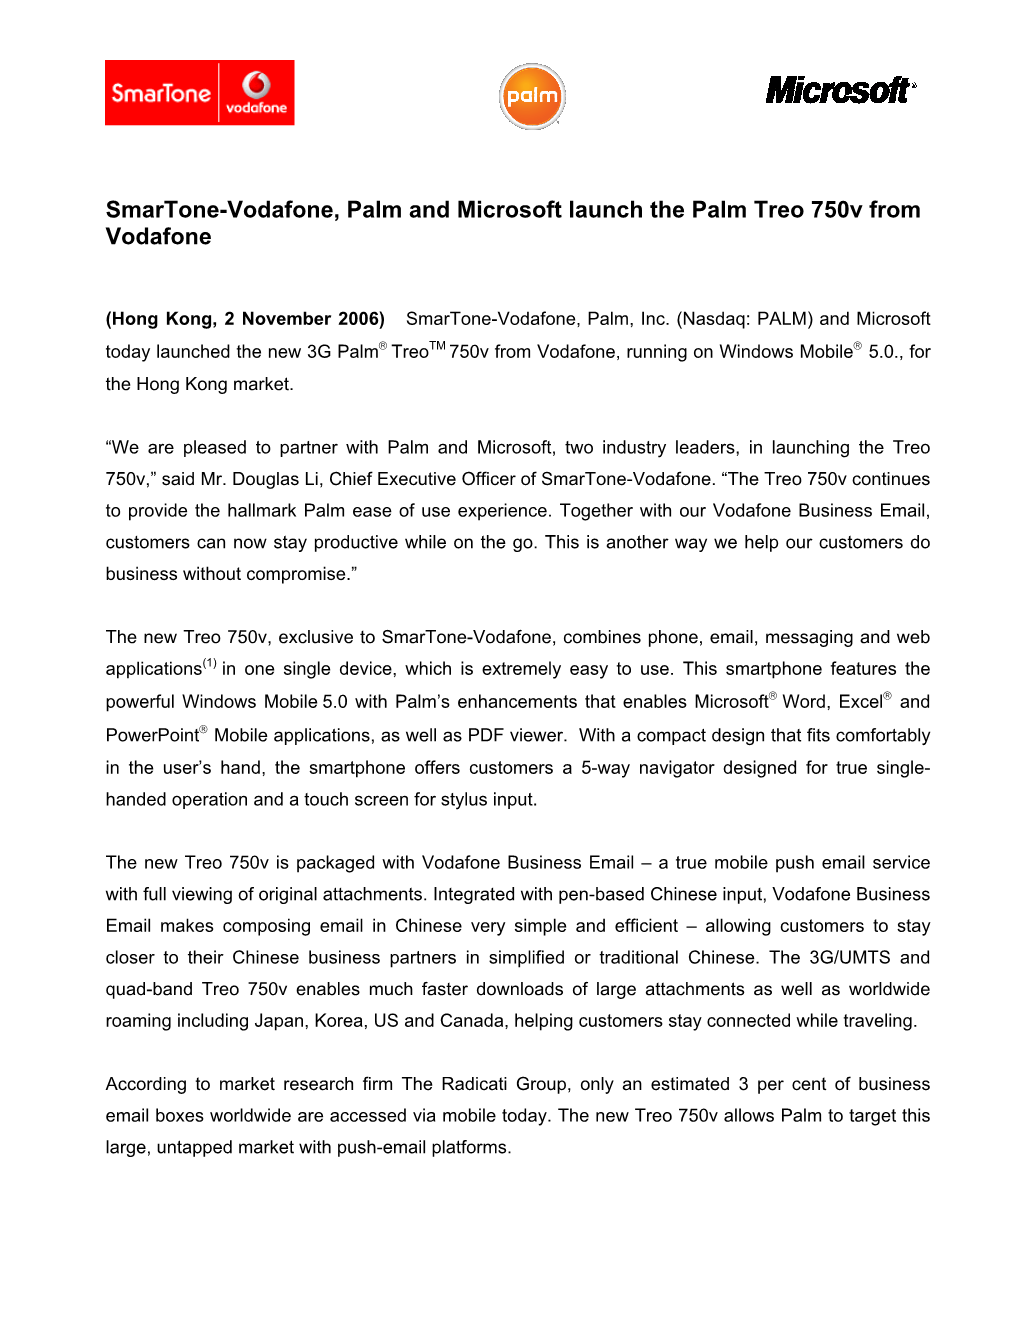 Smartone-Vodafone, Palm and Microsoft Launch the Palm Treo 750V from Vodafone